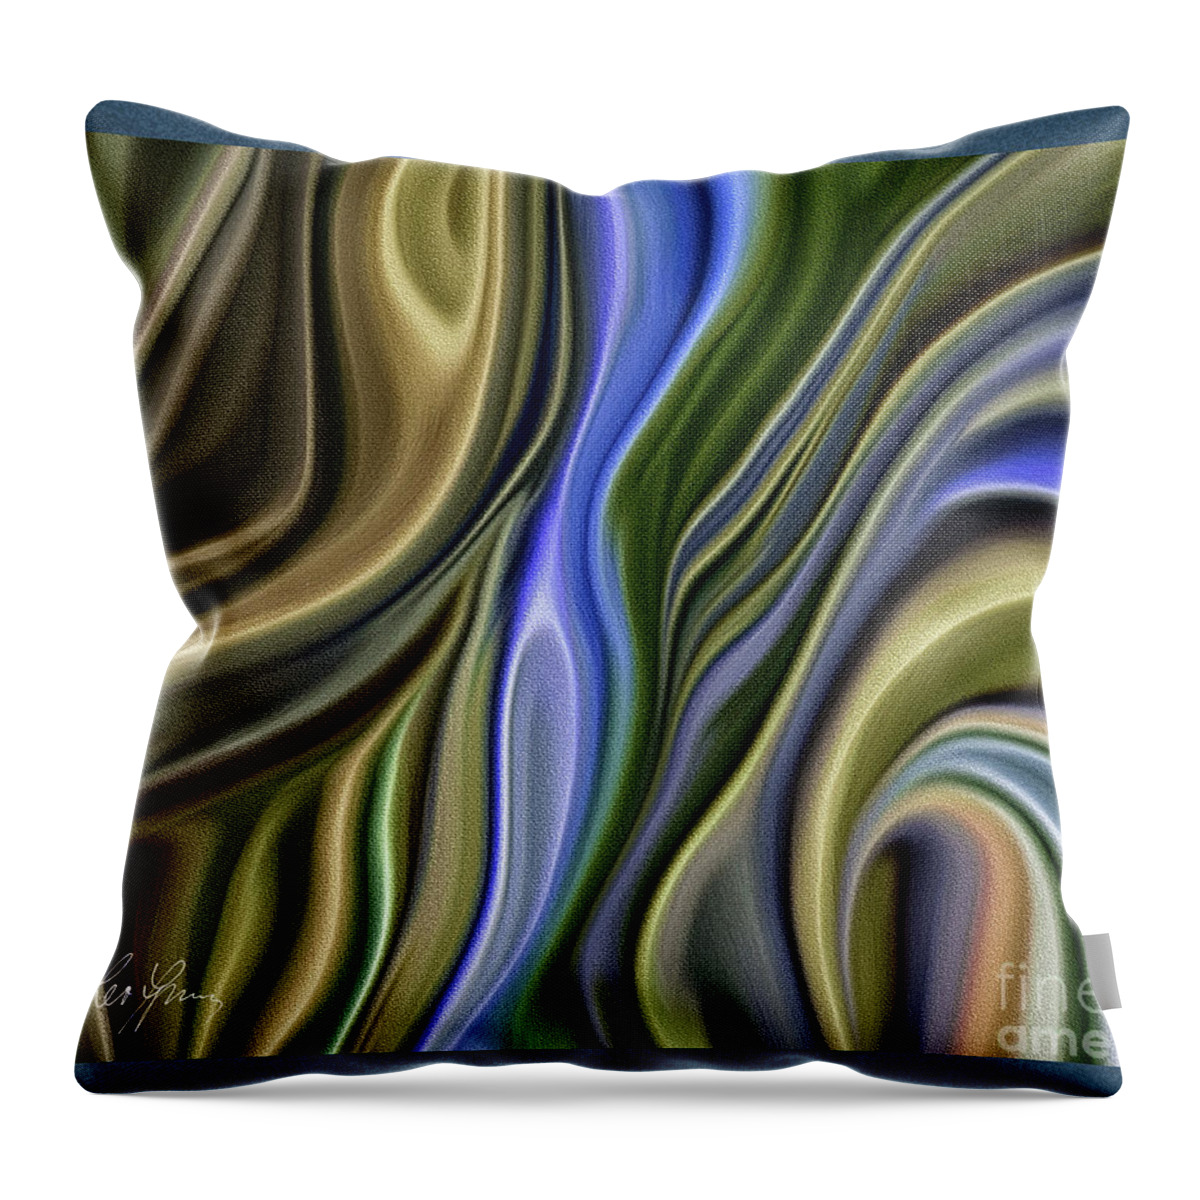 River Throw Pillow featuring the digital art Around The River by Leo Symon